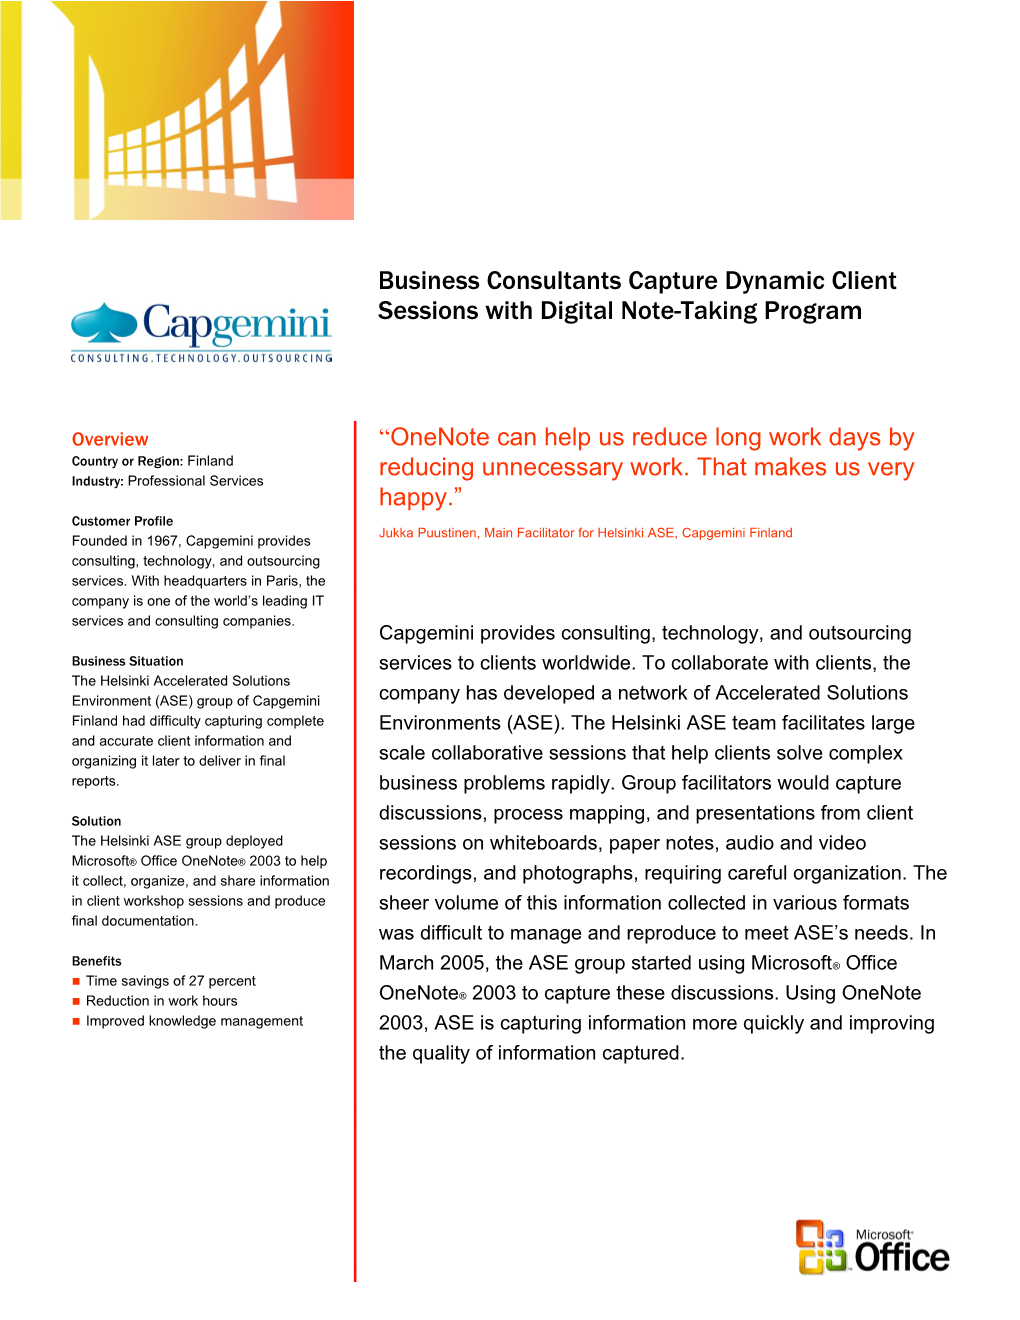 Business Consultants Capture Dynamic Client Sessions with Digital Note-Taking Program